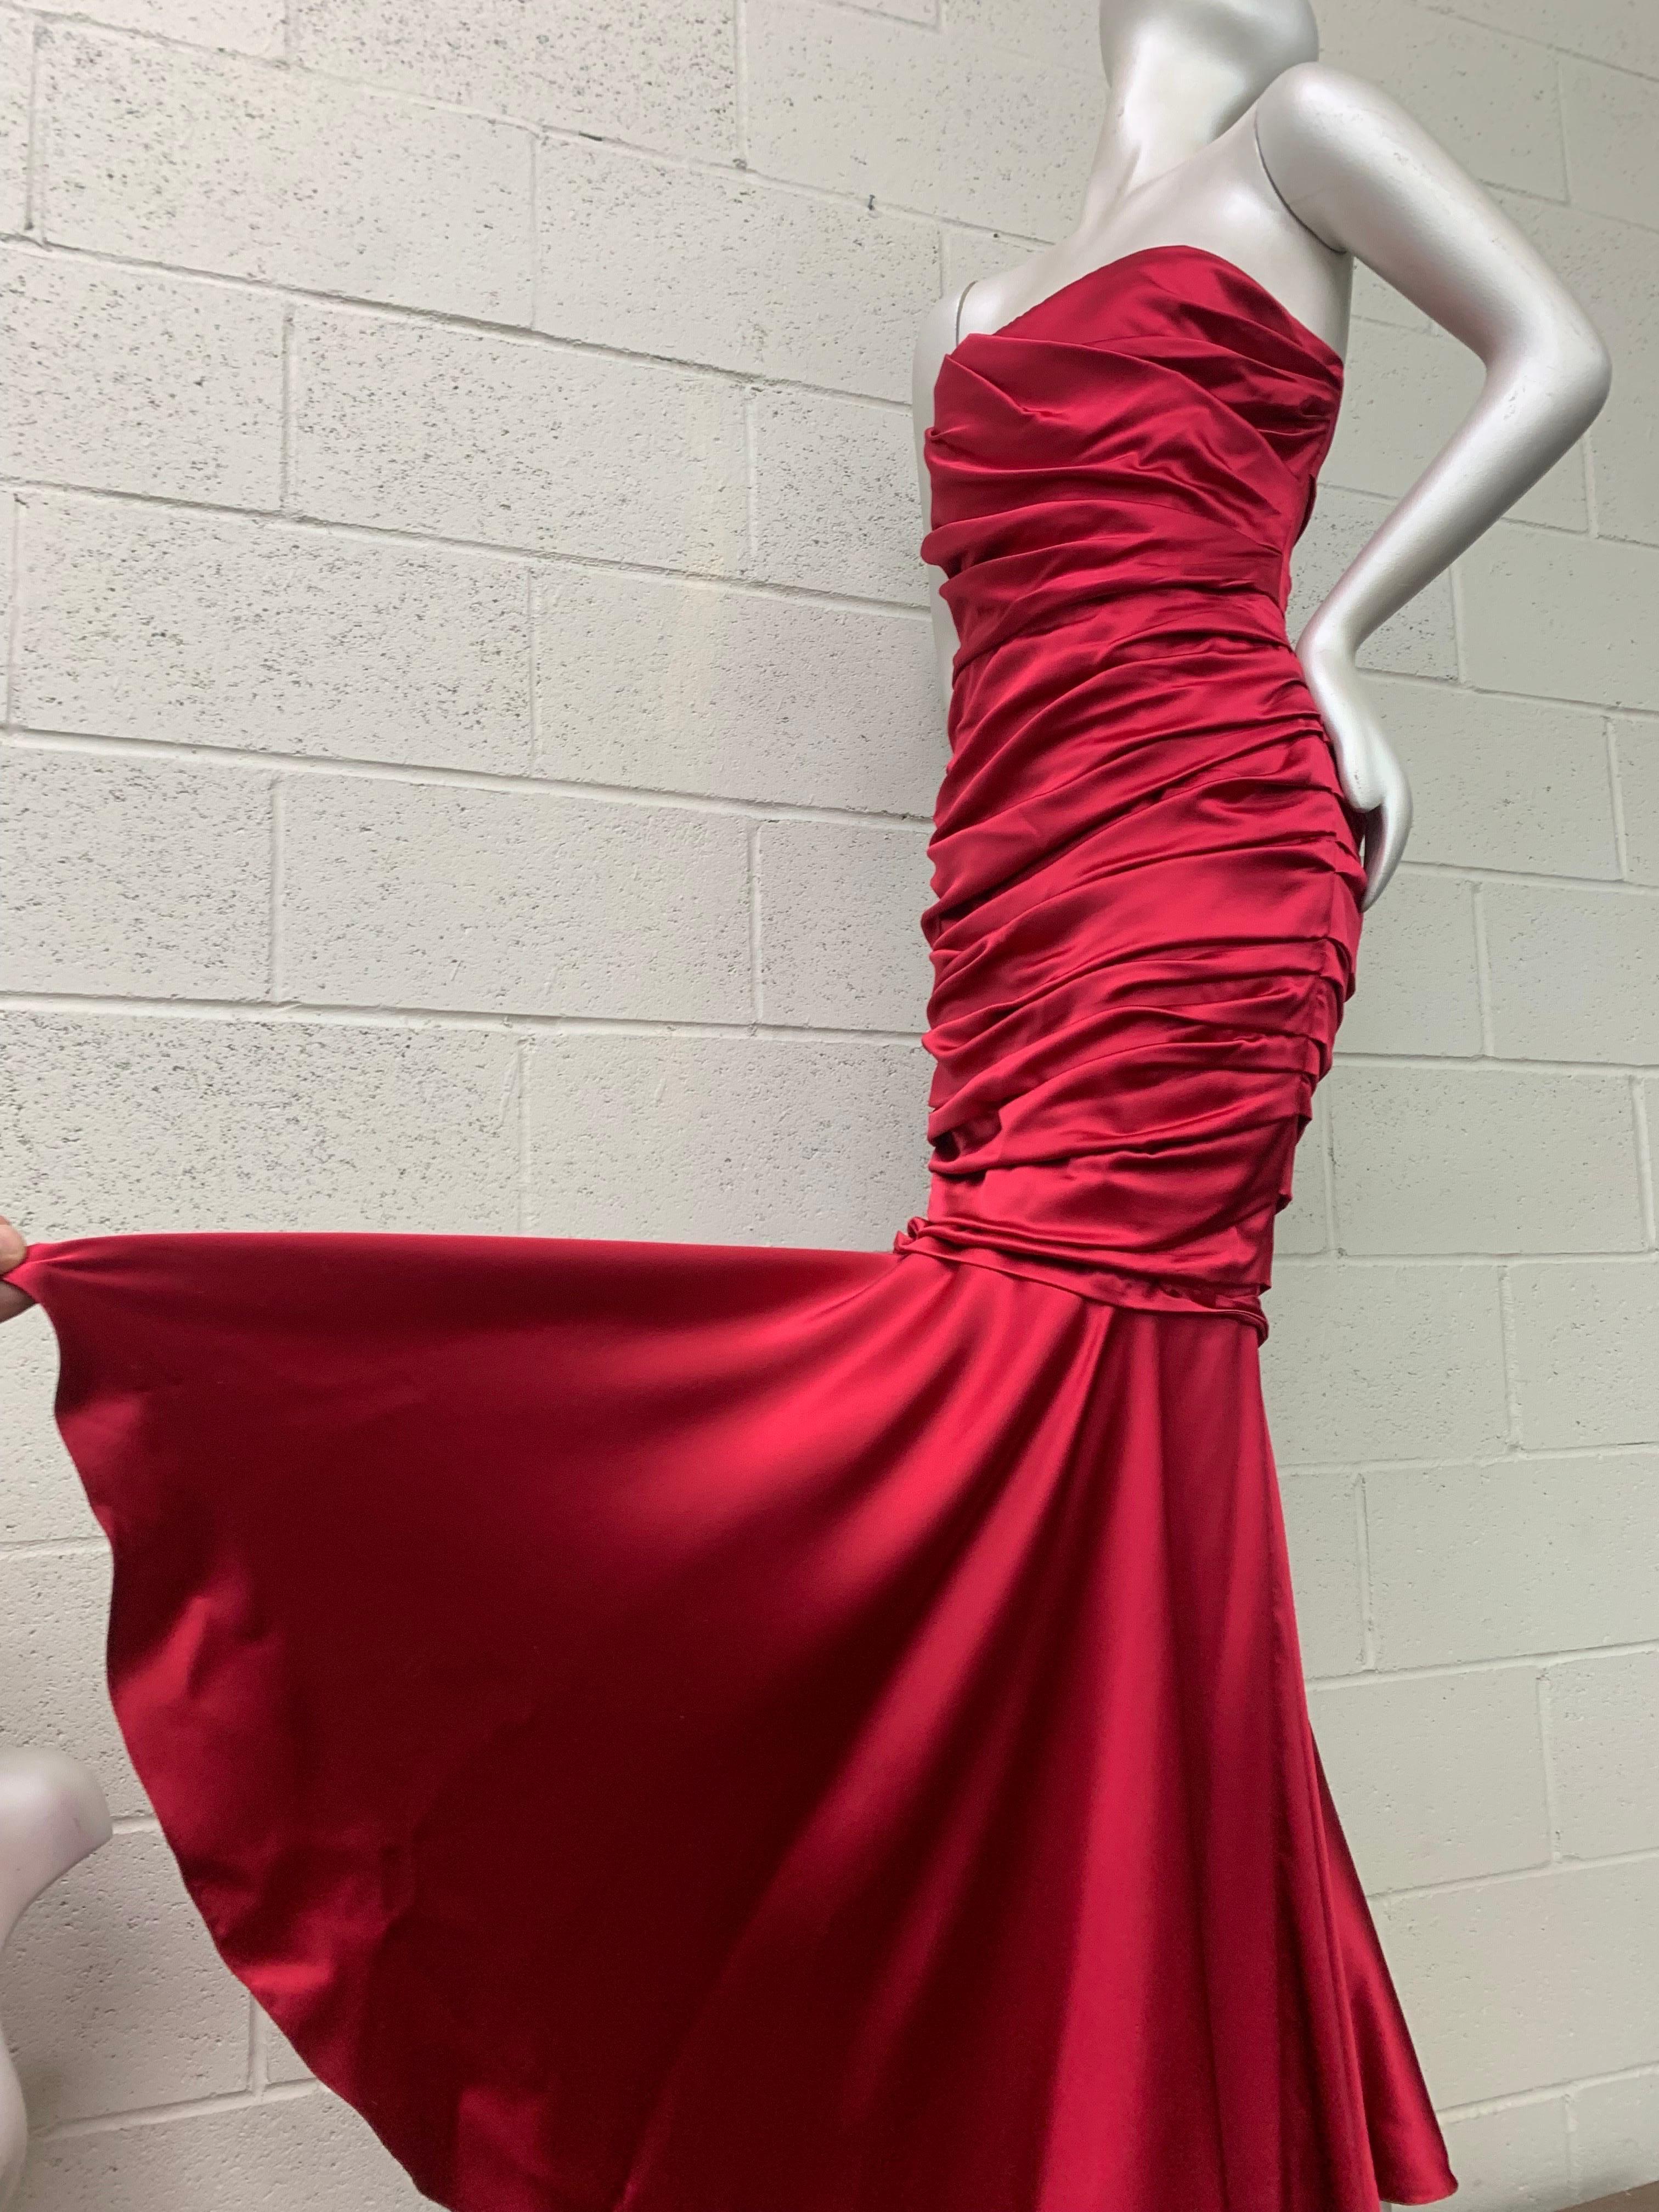 Dolce & Gabbana Red Satin Strapless Corset Gown w Fishtail Hem & Ruched Bodice. Fully boned and structured inner corseting details and a beautifully fluid and lush bias-cut hemline. Back zipper. Fully lined. New, never worn. Size 44. Monogrammed